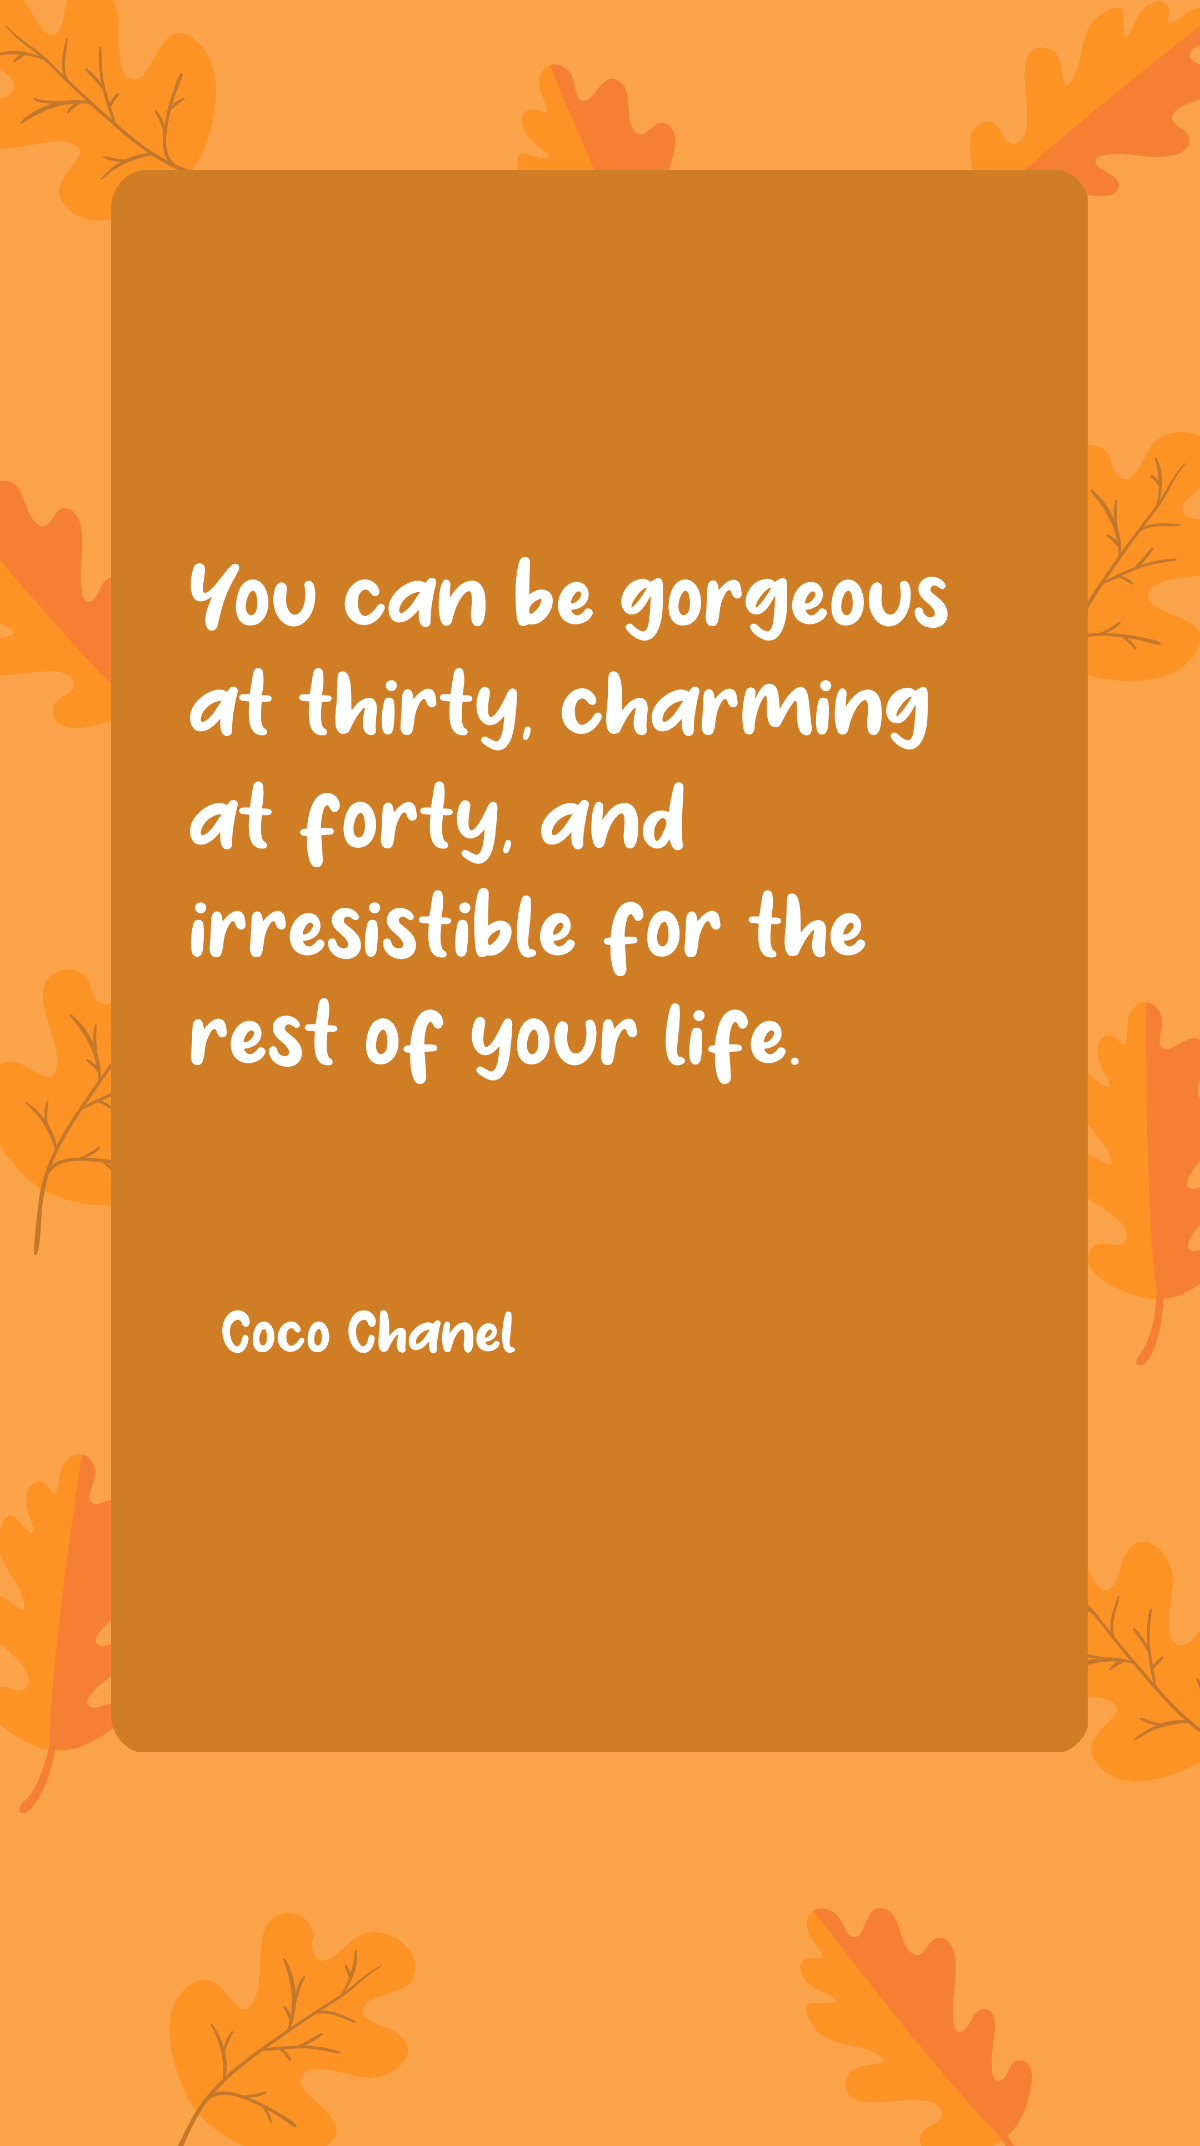 Coco Chanel - “You can be gorgeous at thirty, charming at forty, and irresistible for the rest of your life.” Template